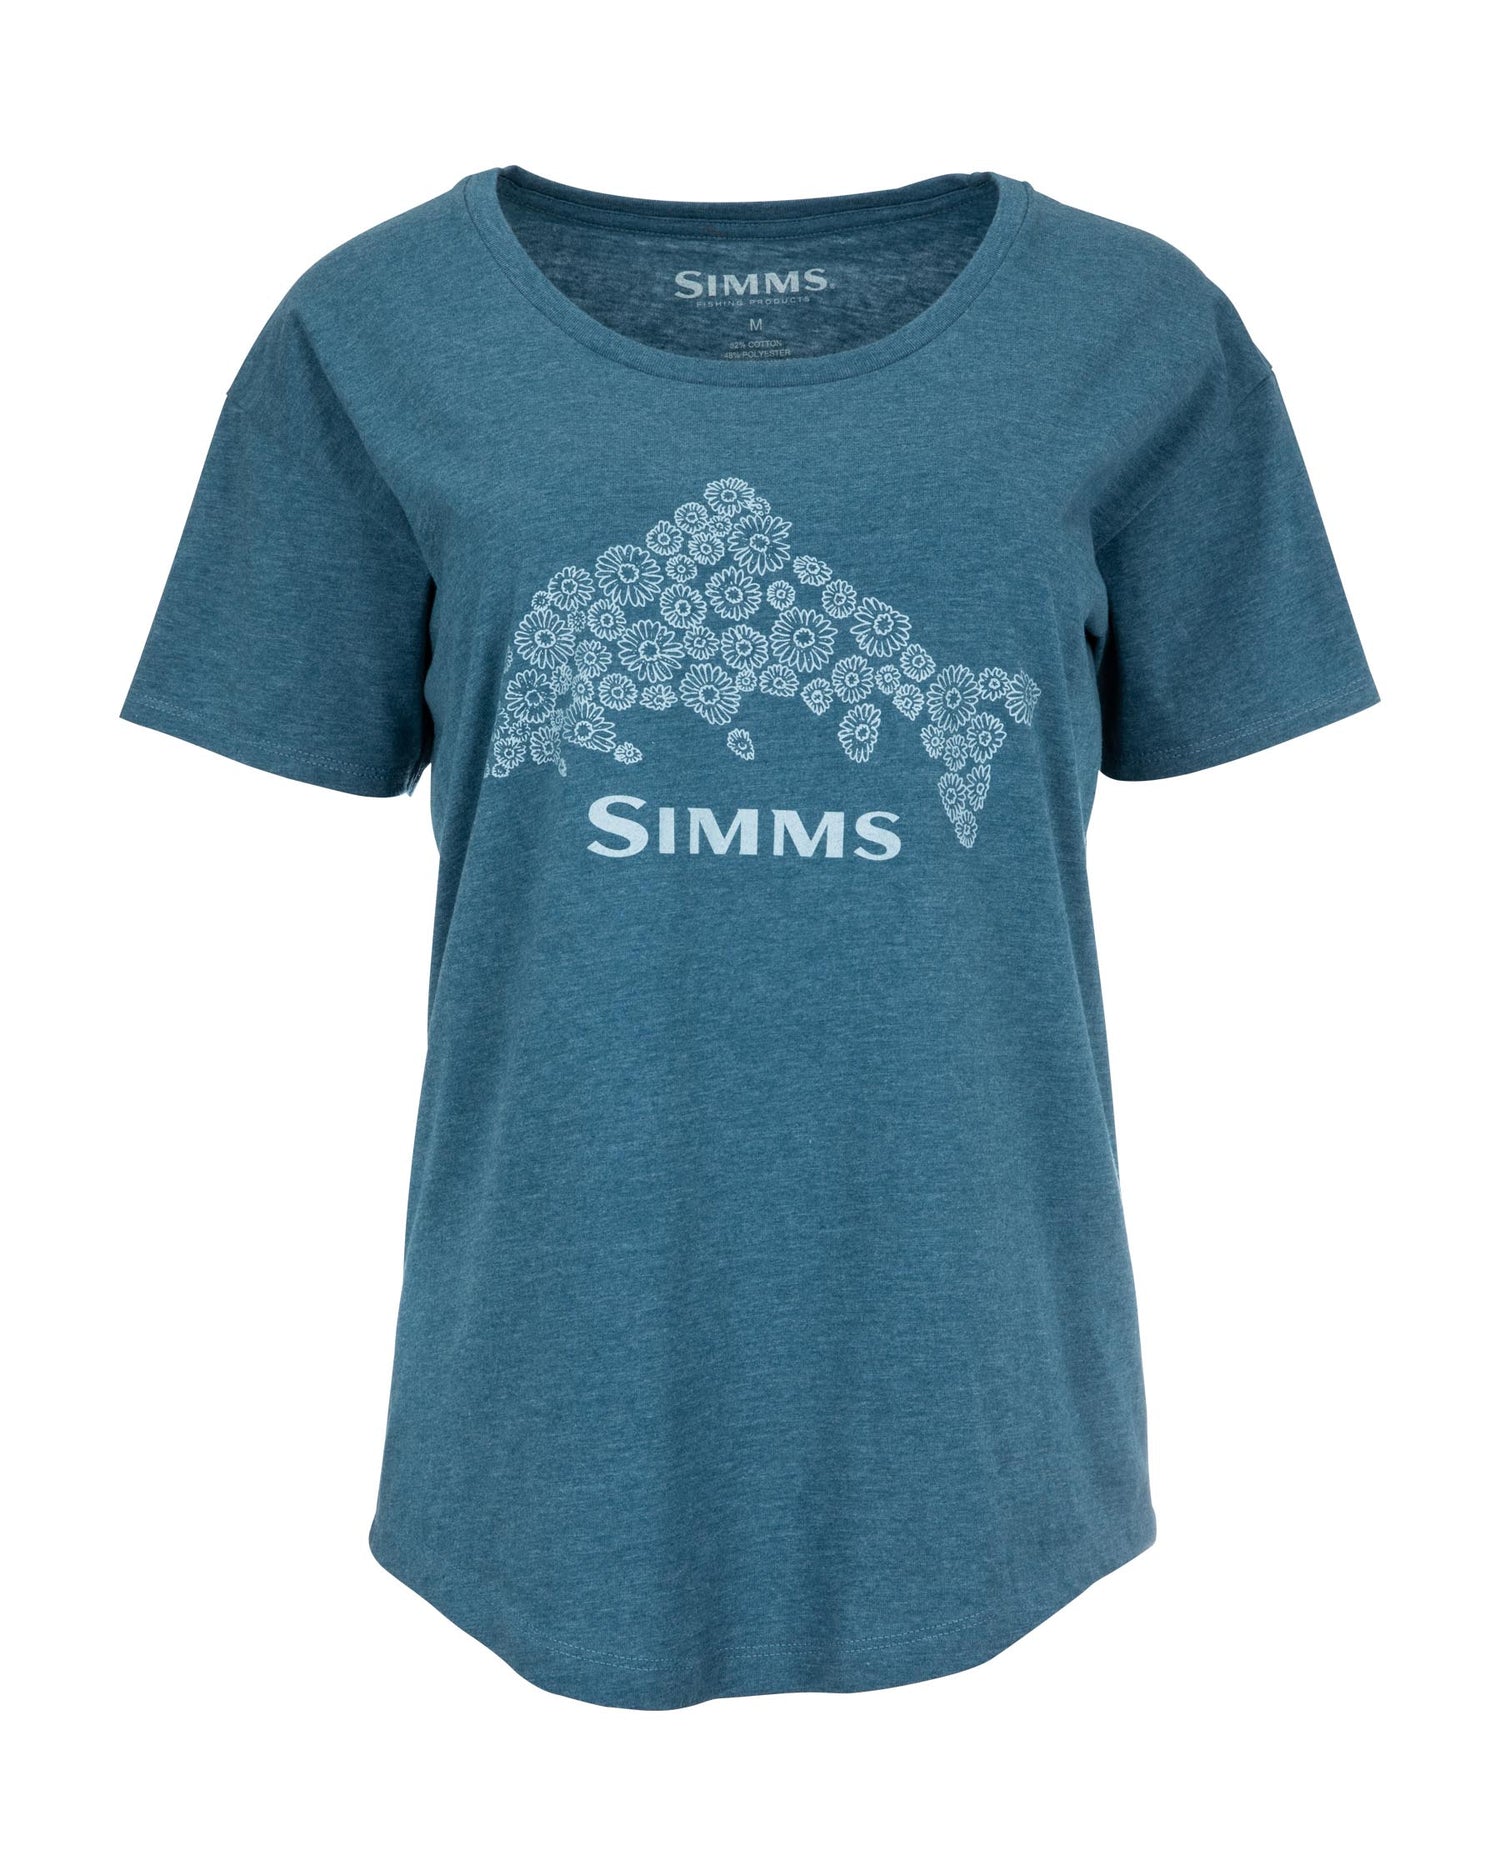 Simms W's Floral Trout Shirt Steel Blue Heather / S